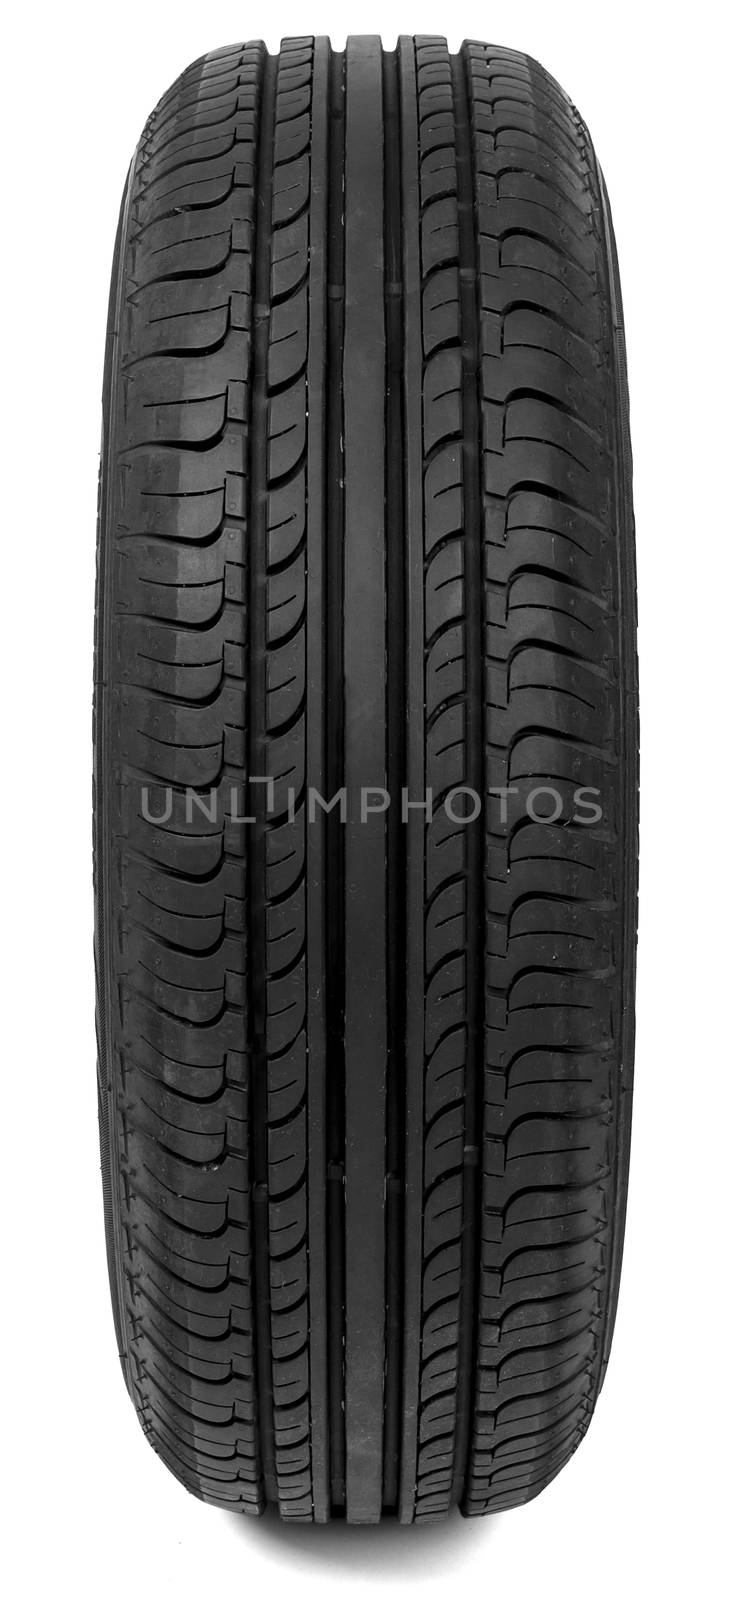 Car rubber tire isolated on white background